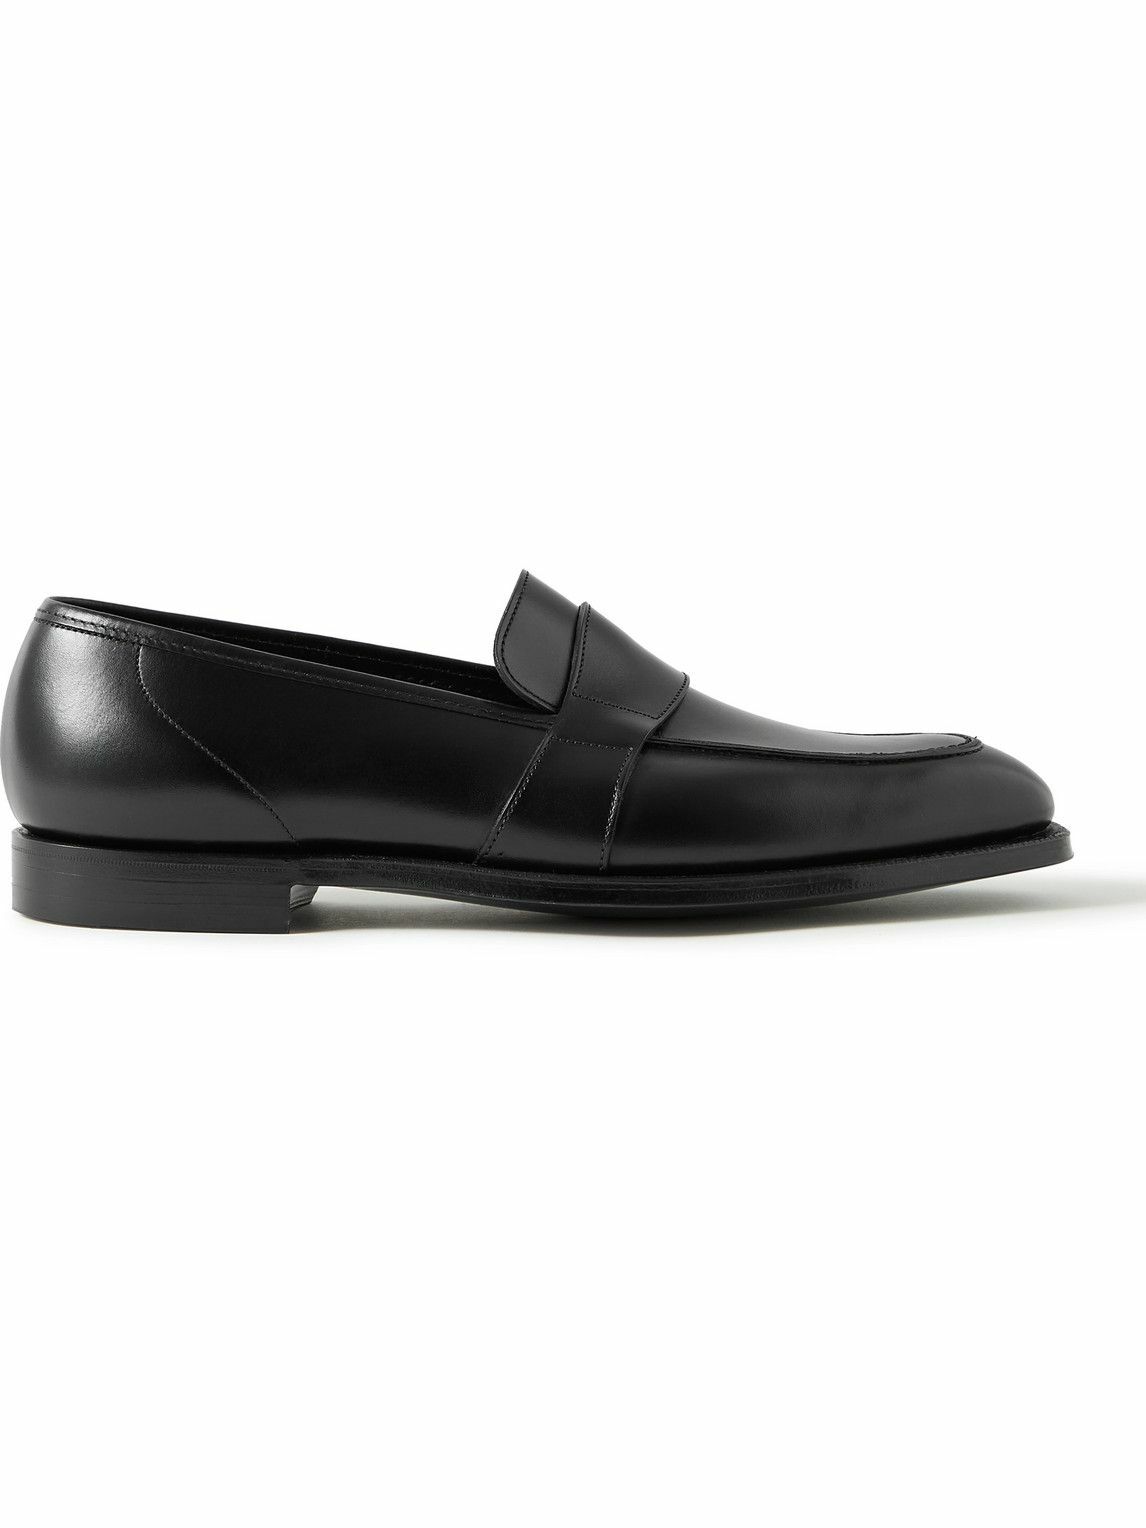 George Cleverley - Owen Leather Penny Loafers - Black George Cleverley